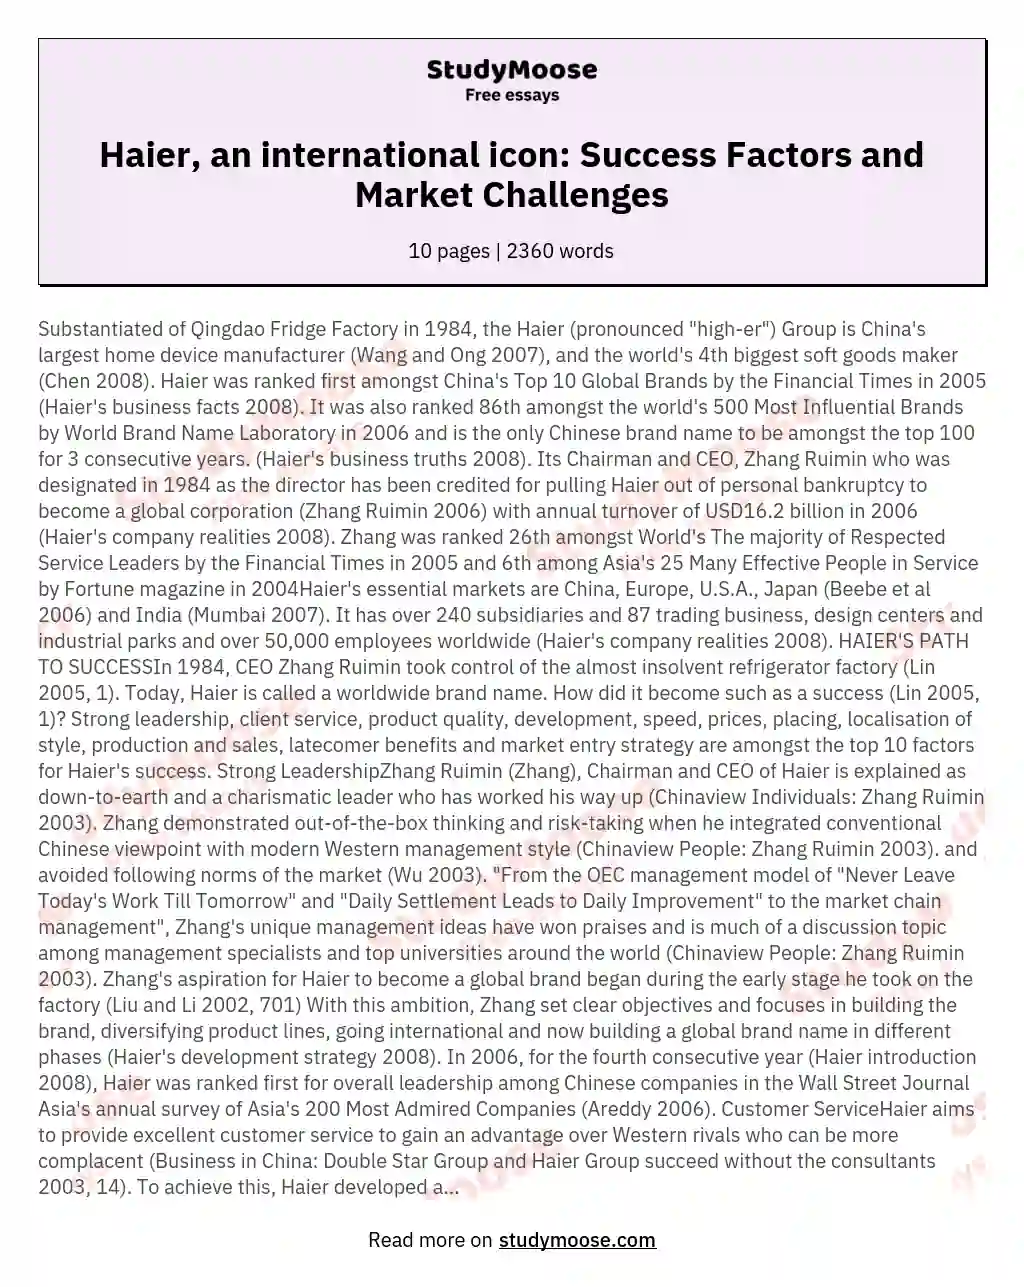 Haier, an international icon: Success Factors and Market Challenges essay